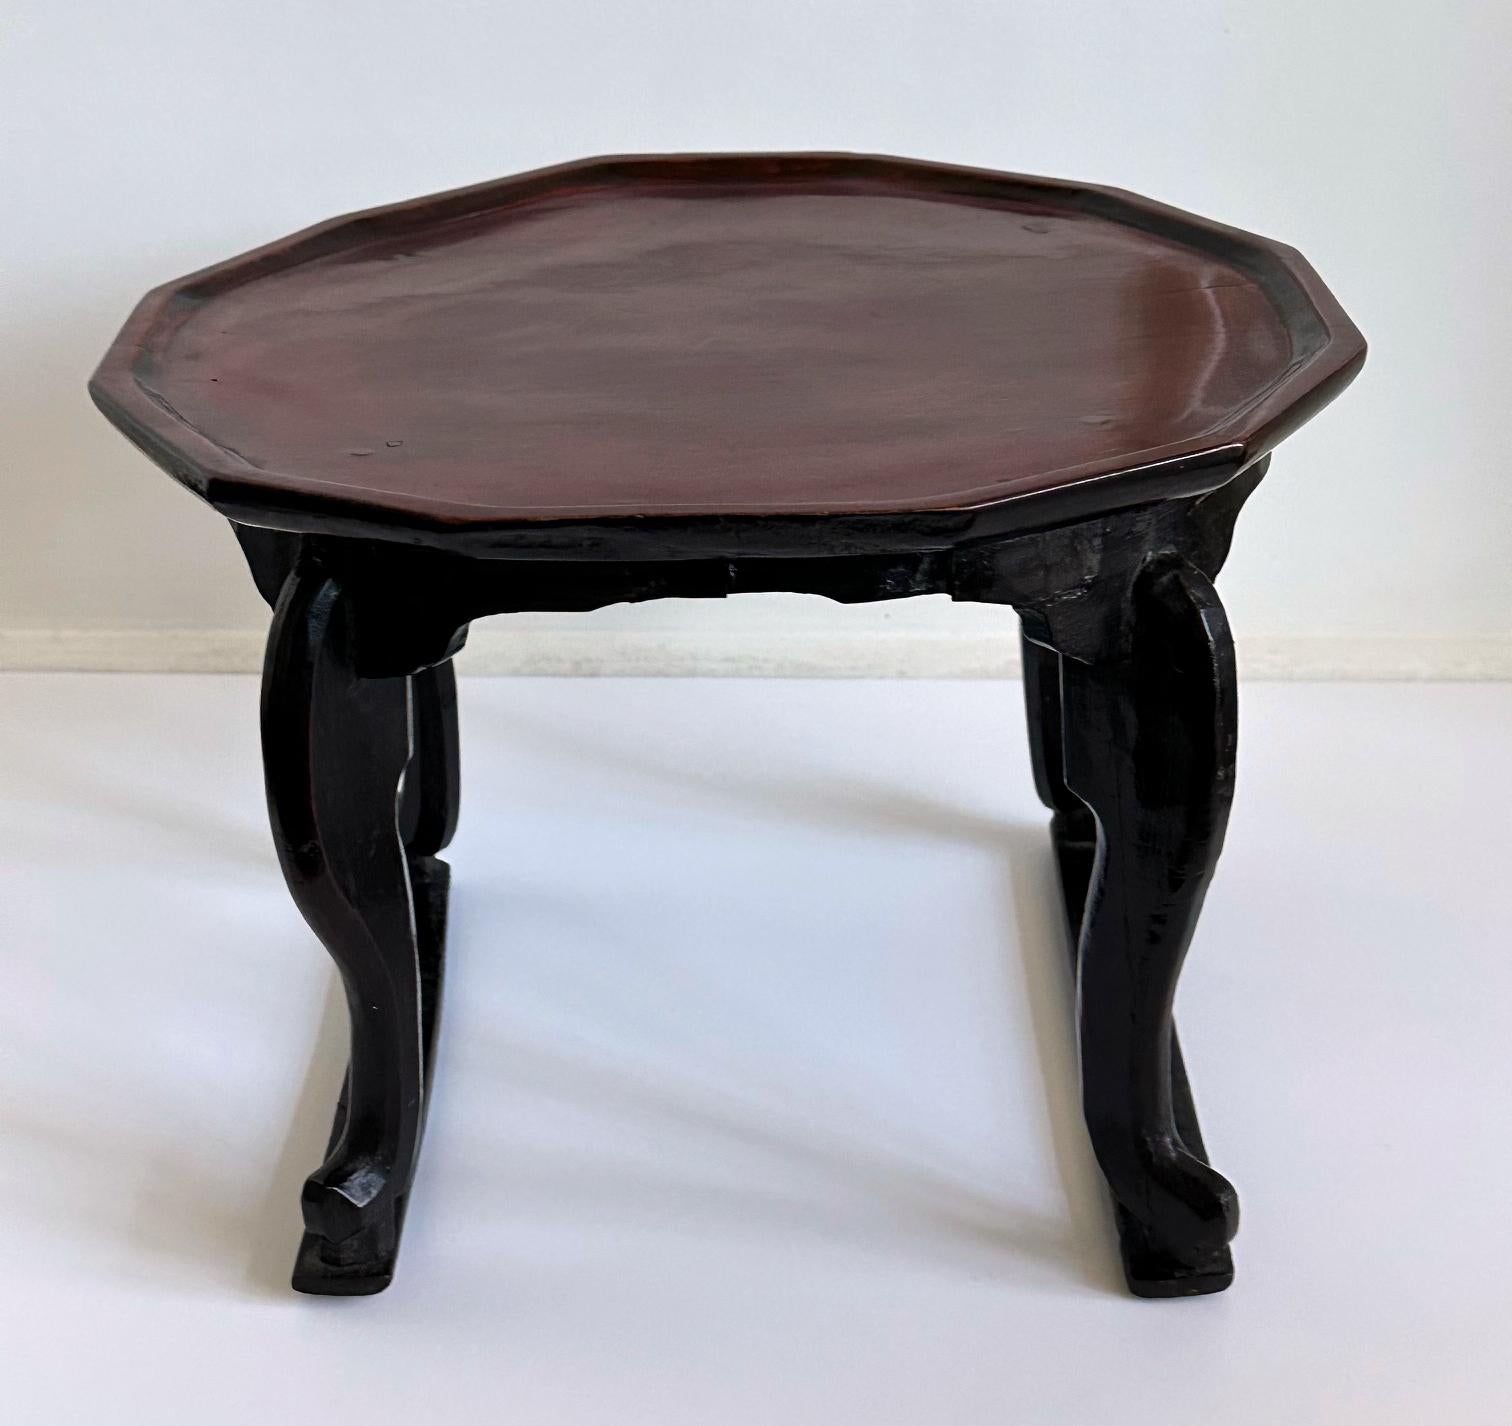 19th Century Antique Korean Lacquer Wood Soban Table Joseon Period For Sale